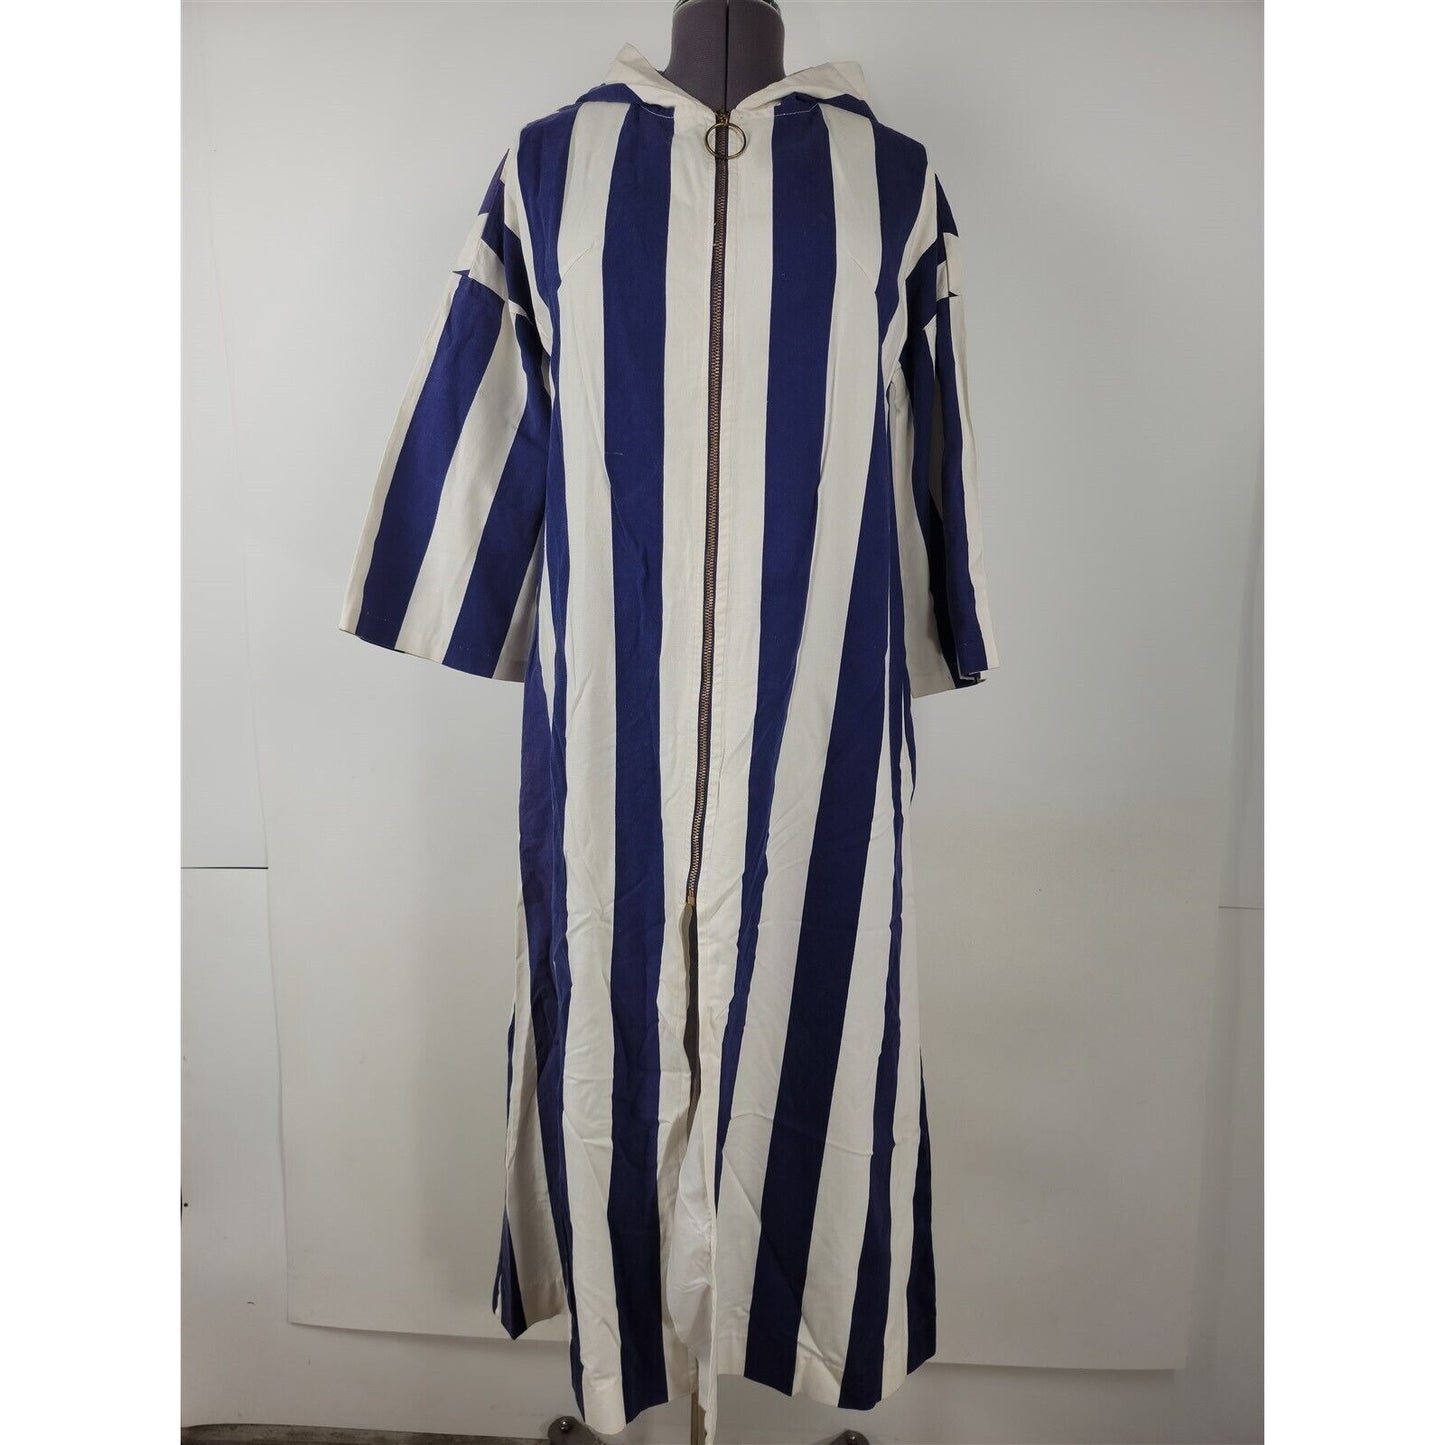 Vintage 70's Beach Pool Robe Striped Cover-Up Fun Fashions by Cole of California